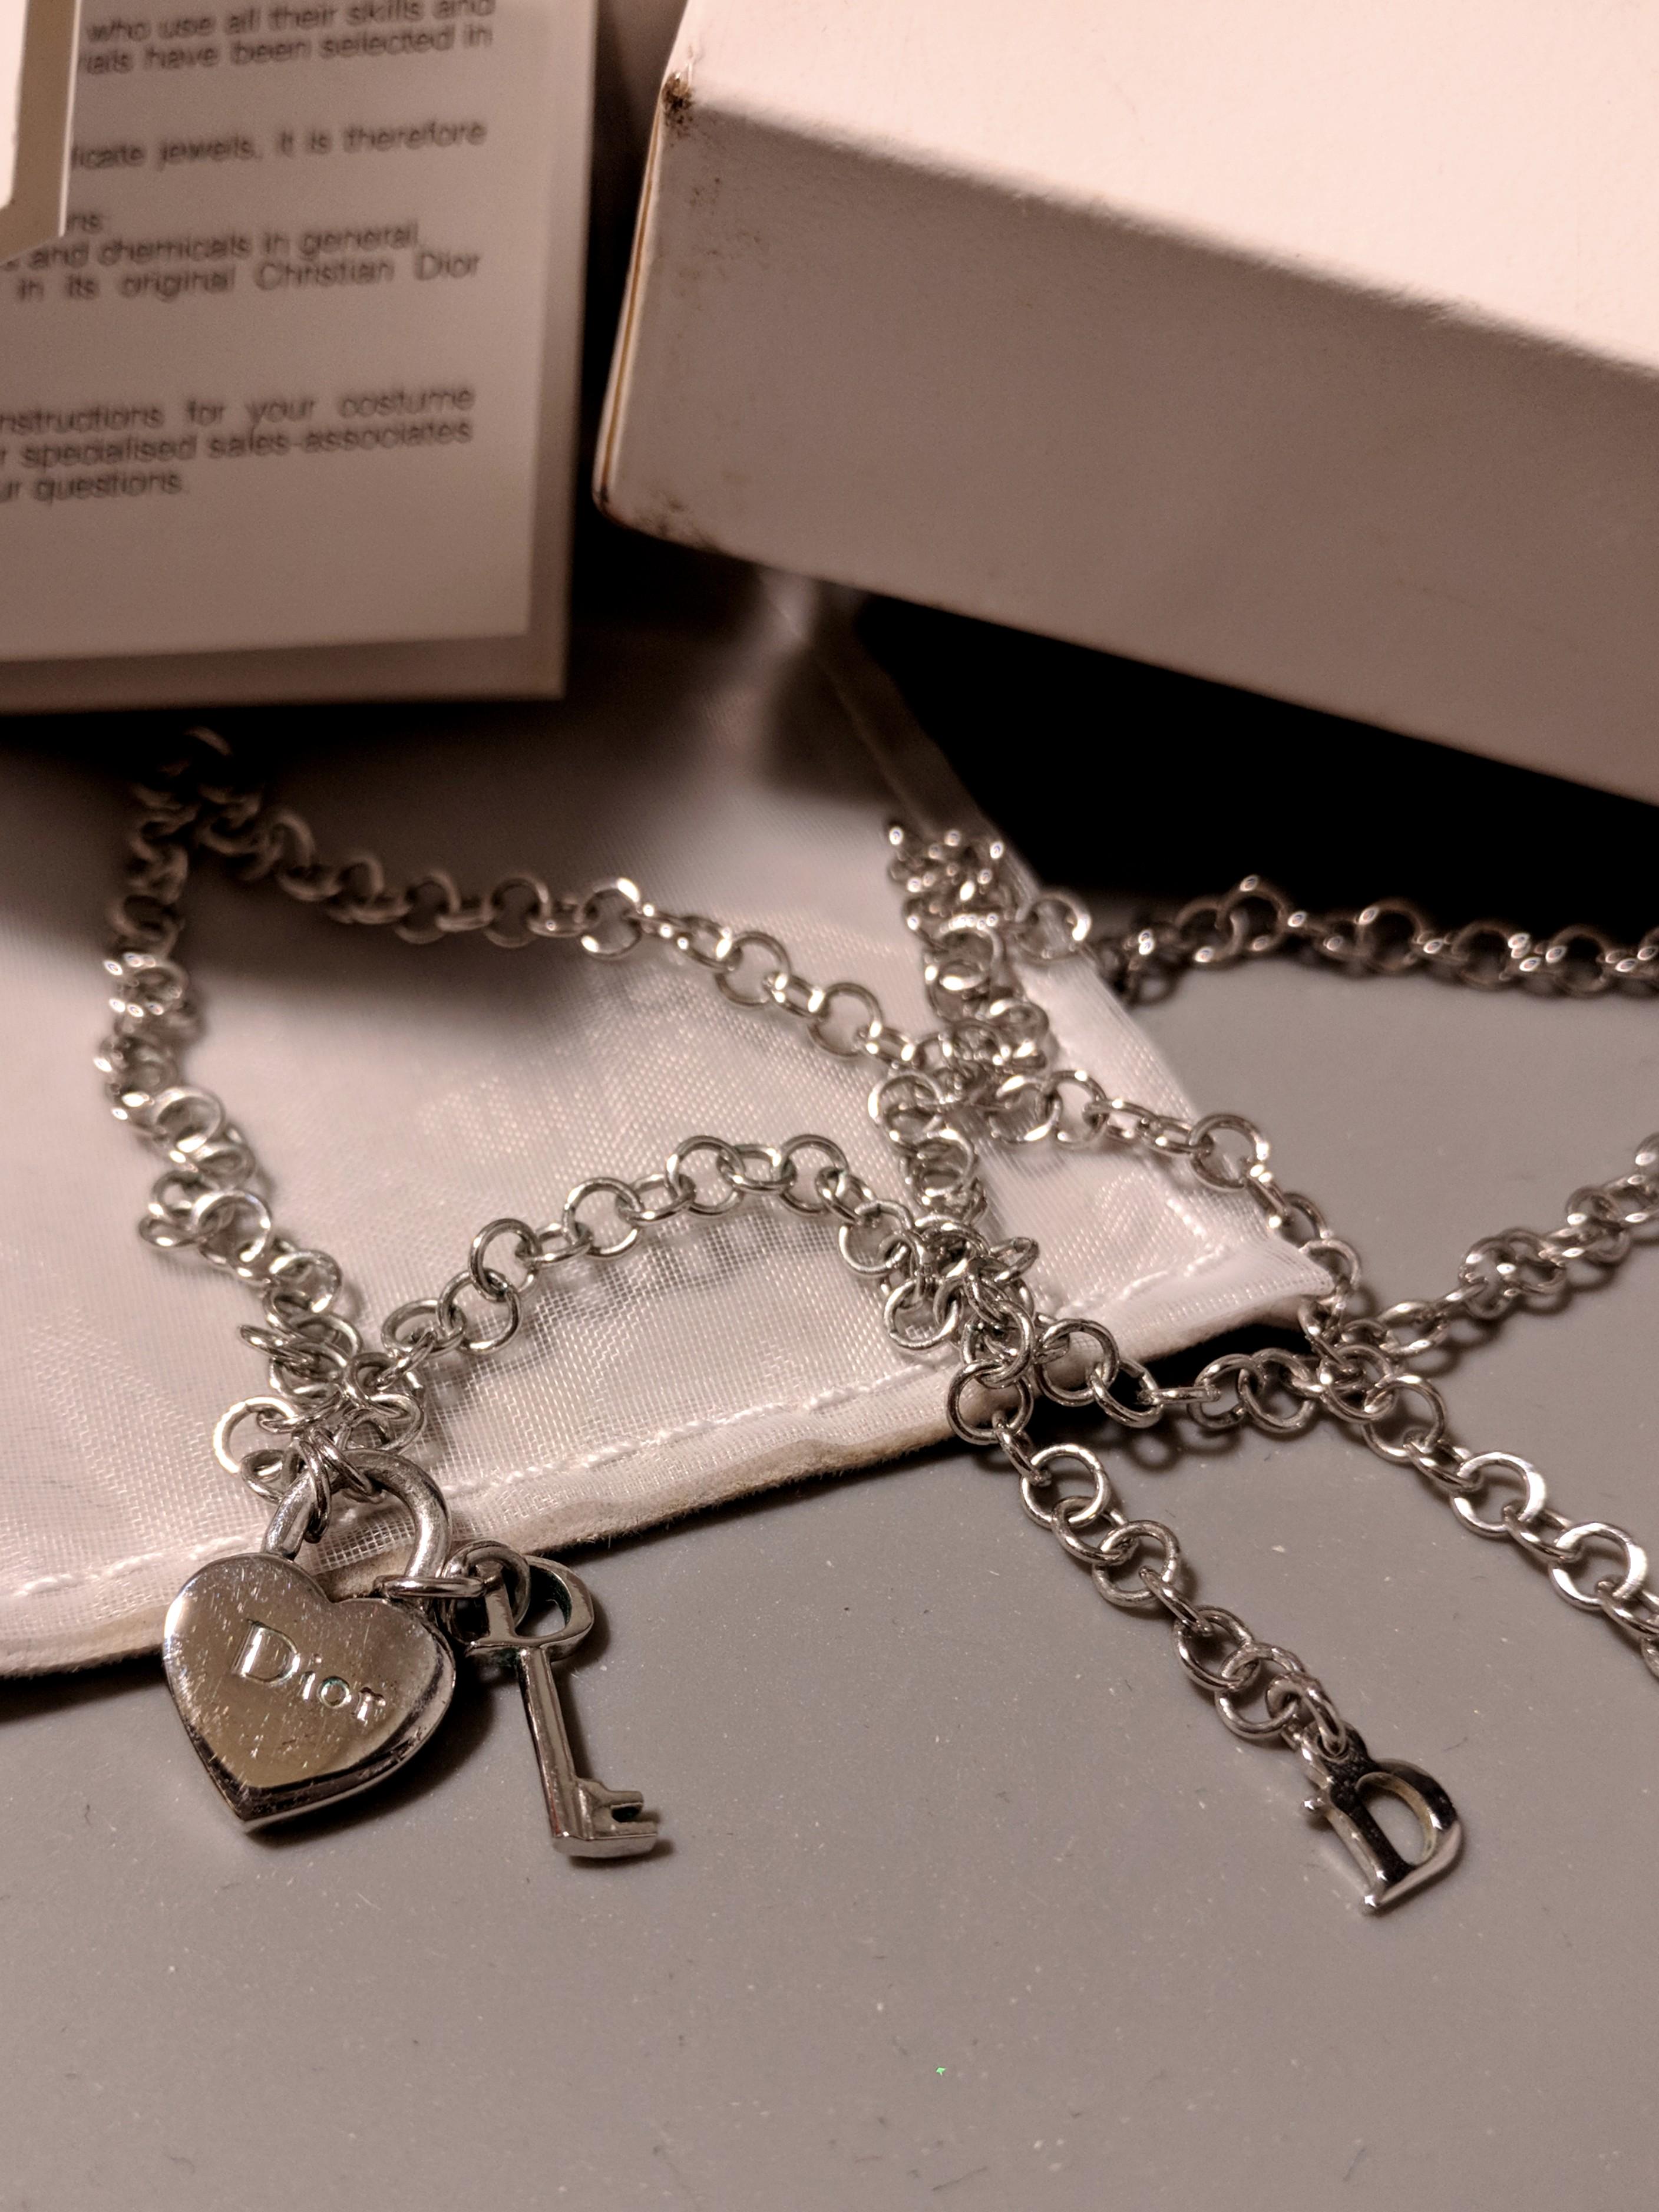 dior lock and key necklace